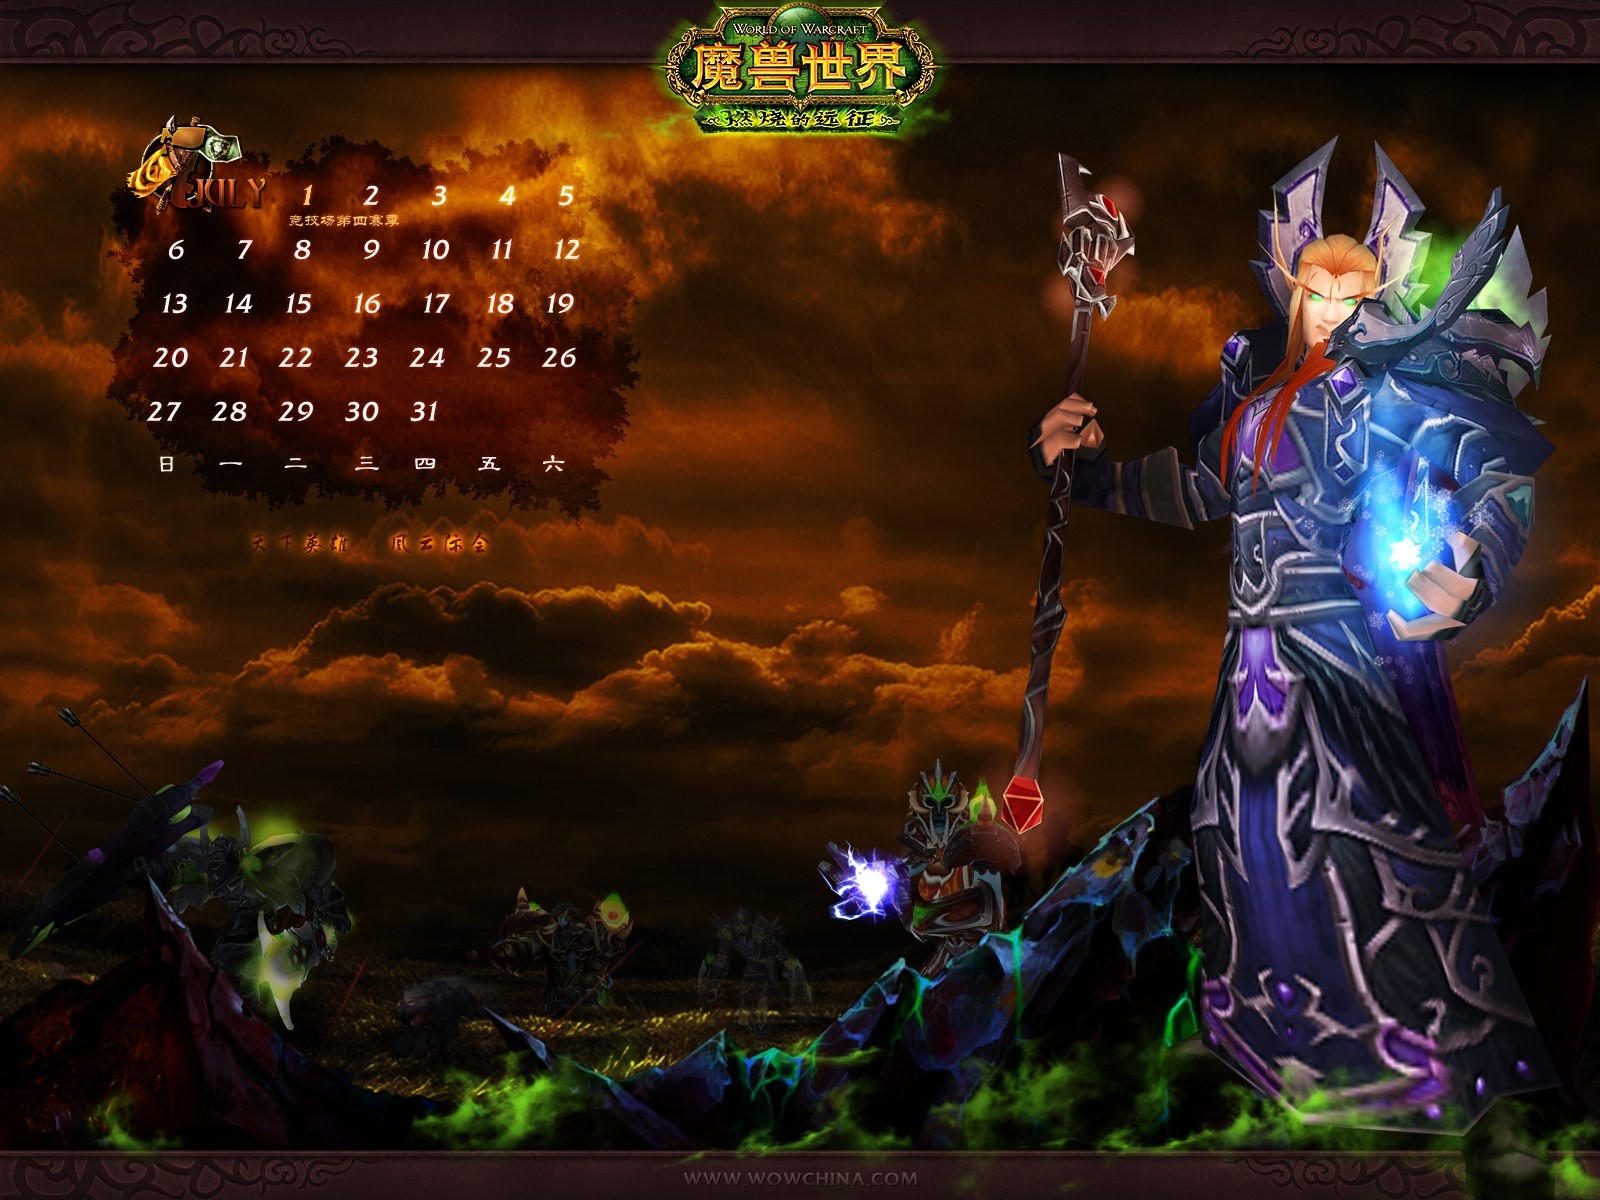 World of Warcraft: The Burning Crusade's official wallpaper (2) #26 - 1600x1200